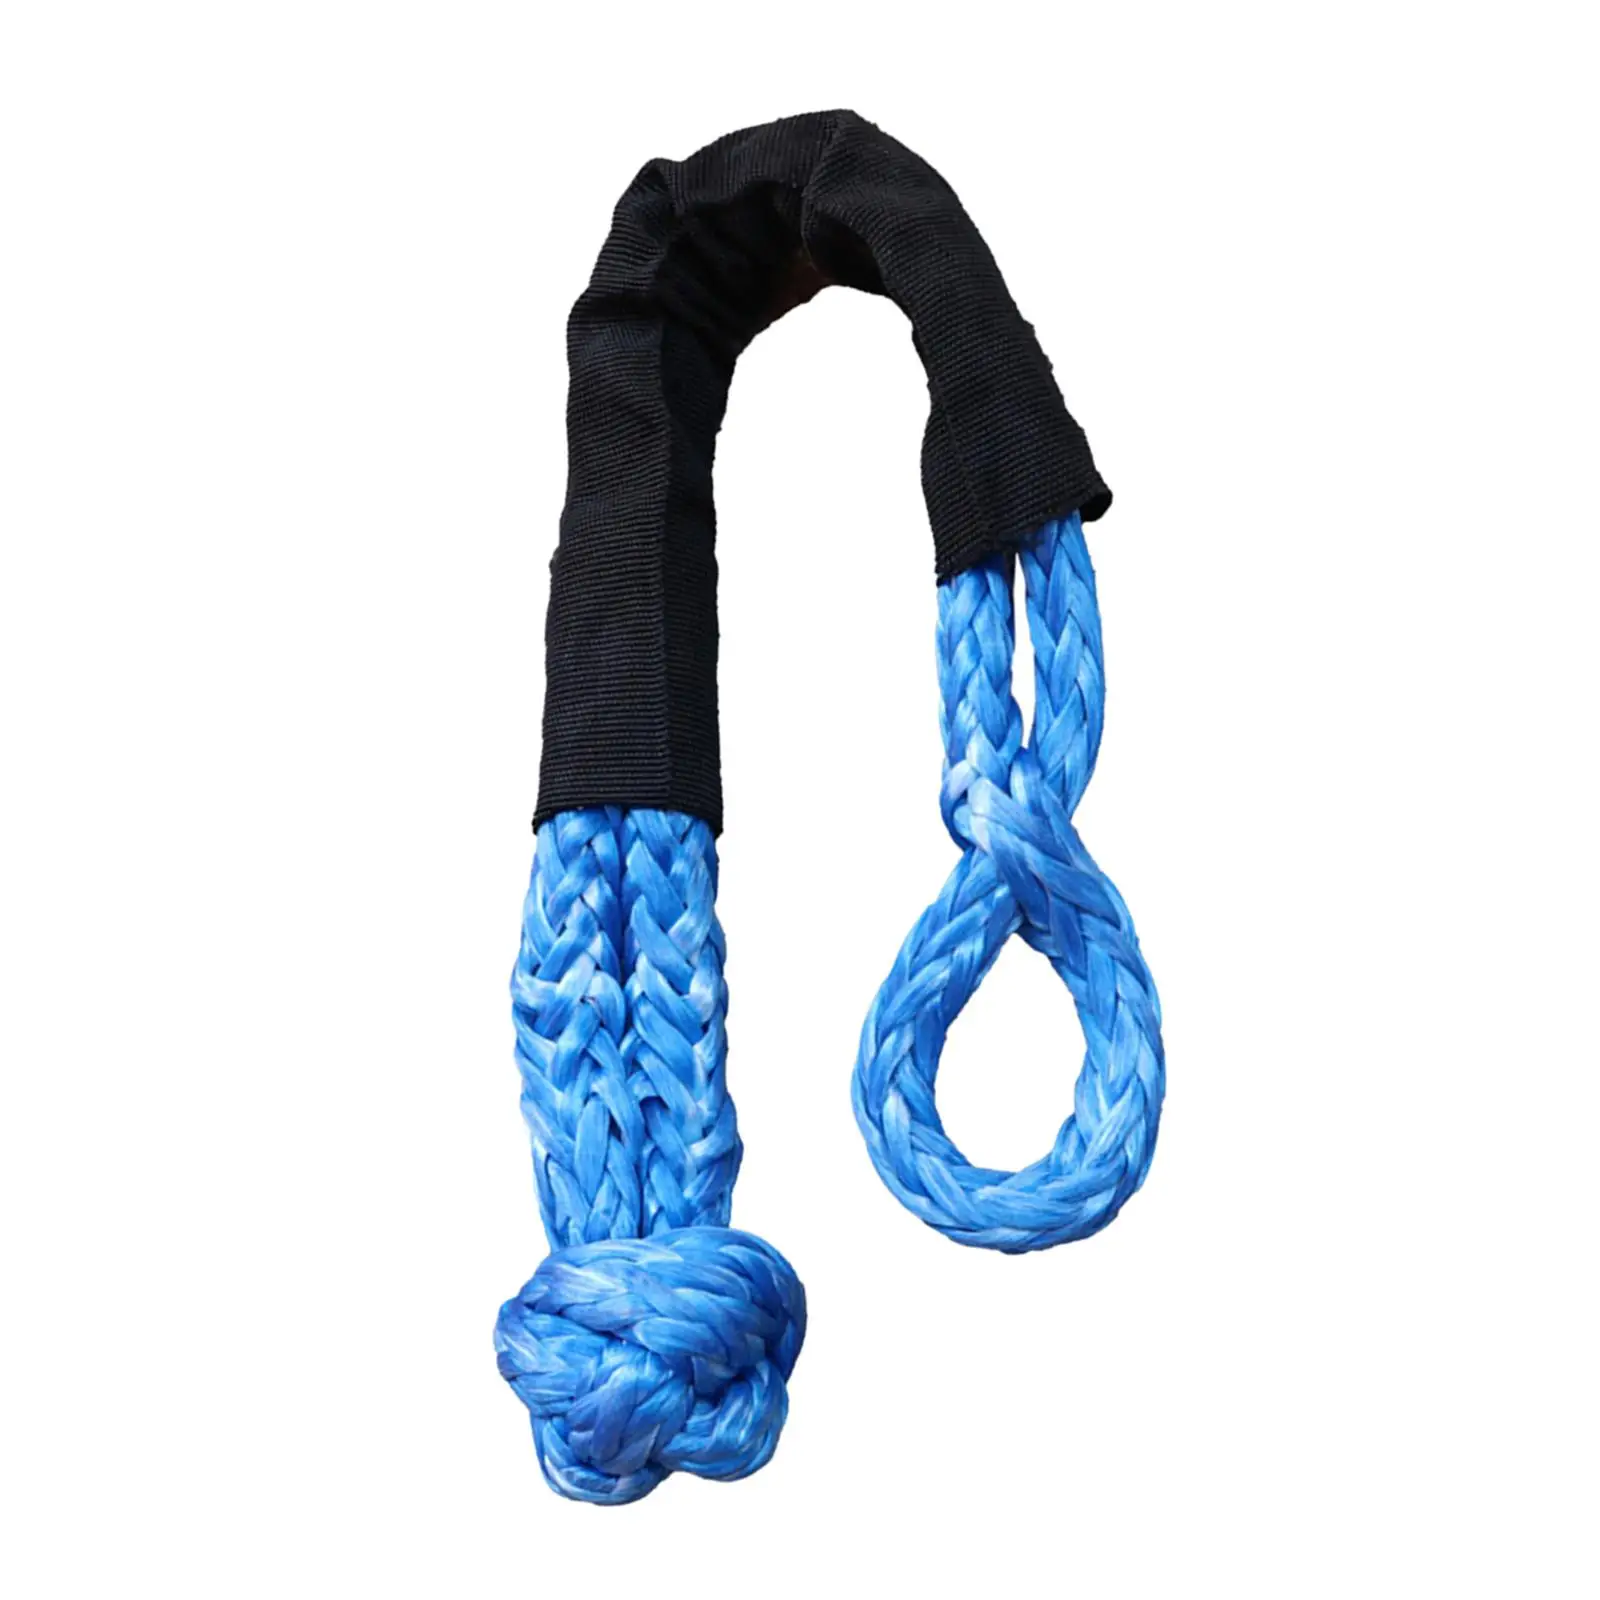 Soft Shackle Towing Rope, Strong Synthetic Rope Strong Breaking Strength for Trucks, SUV, Vehicles Towing